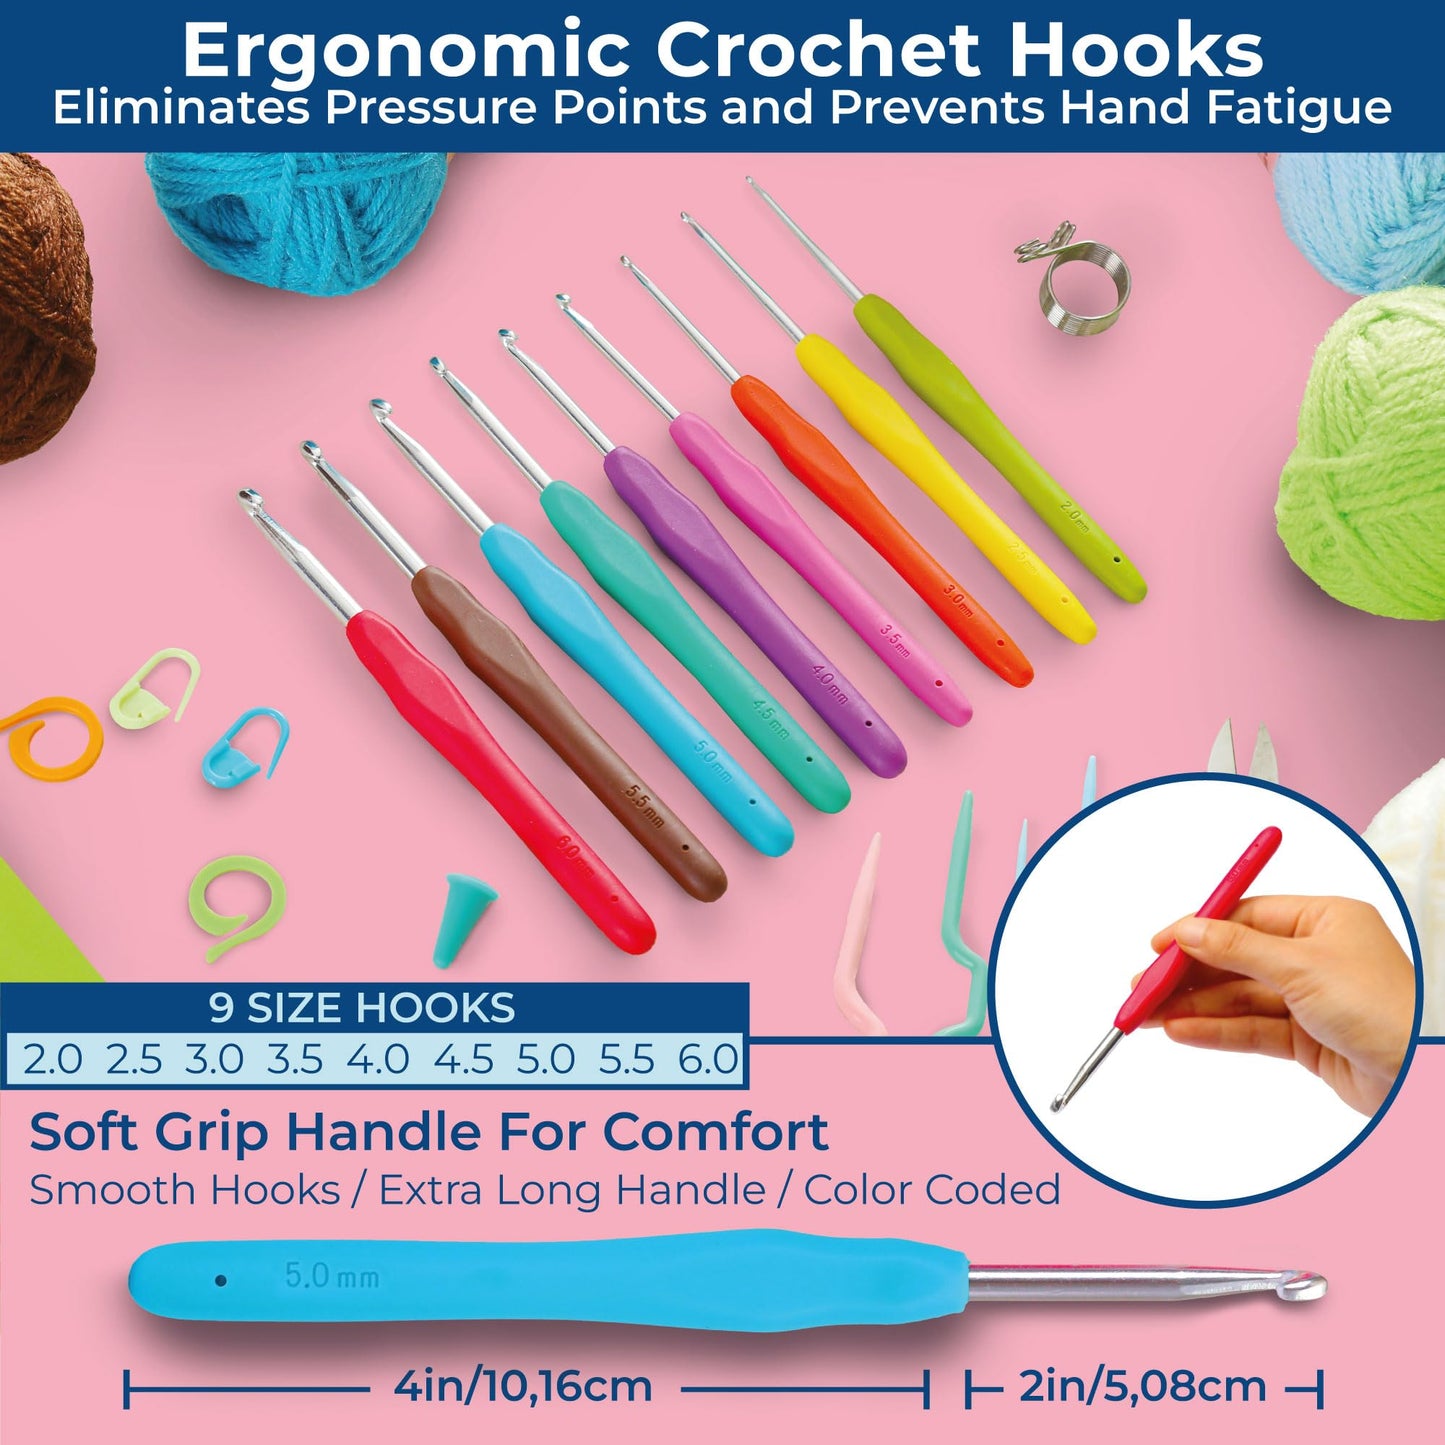 Craftwiz Ultimate Beginner Crochet Kit for Adults and Kids - Learn to Crochet with Complete Crochet Starter Kit - Perfect Crocheting Kit for